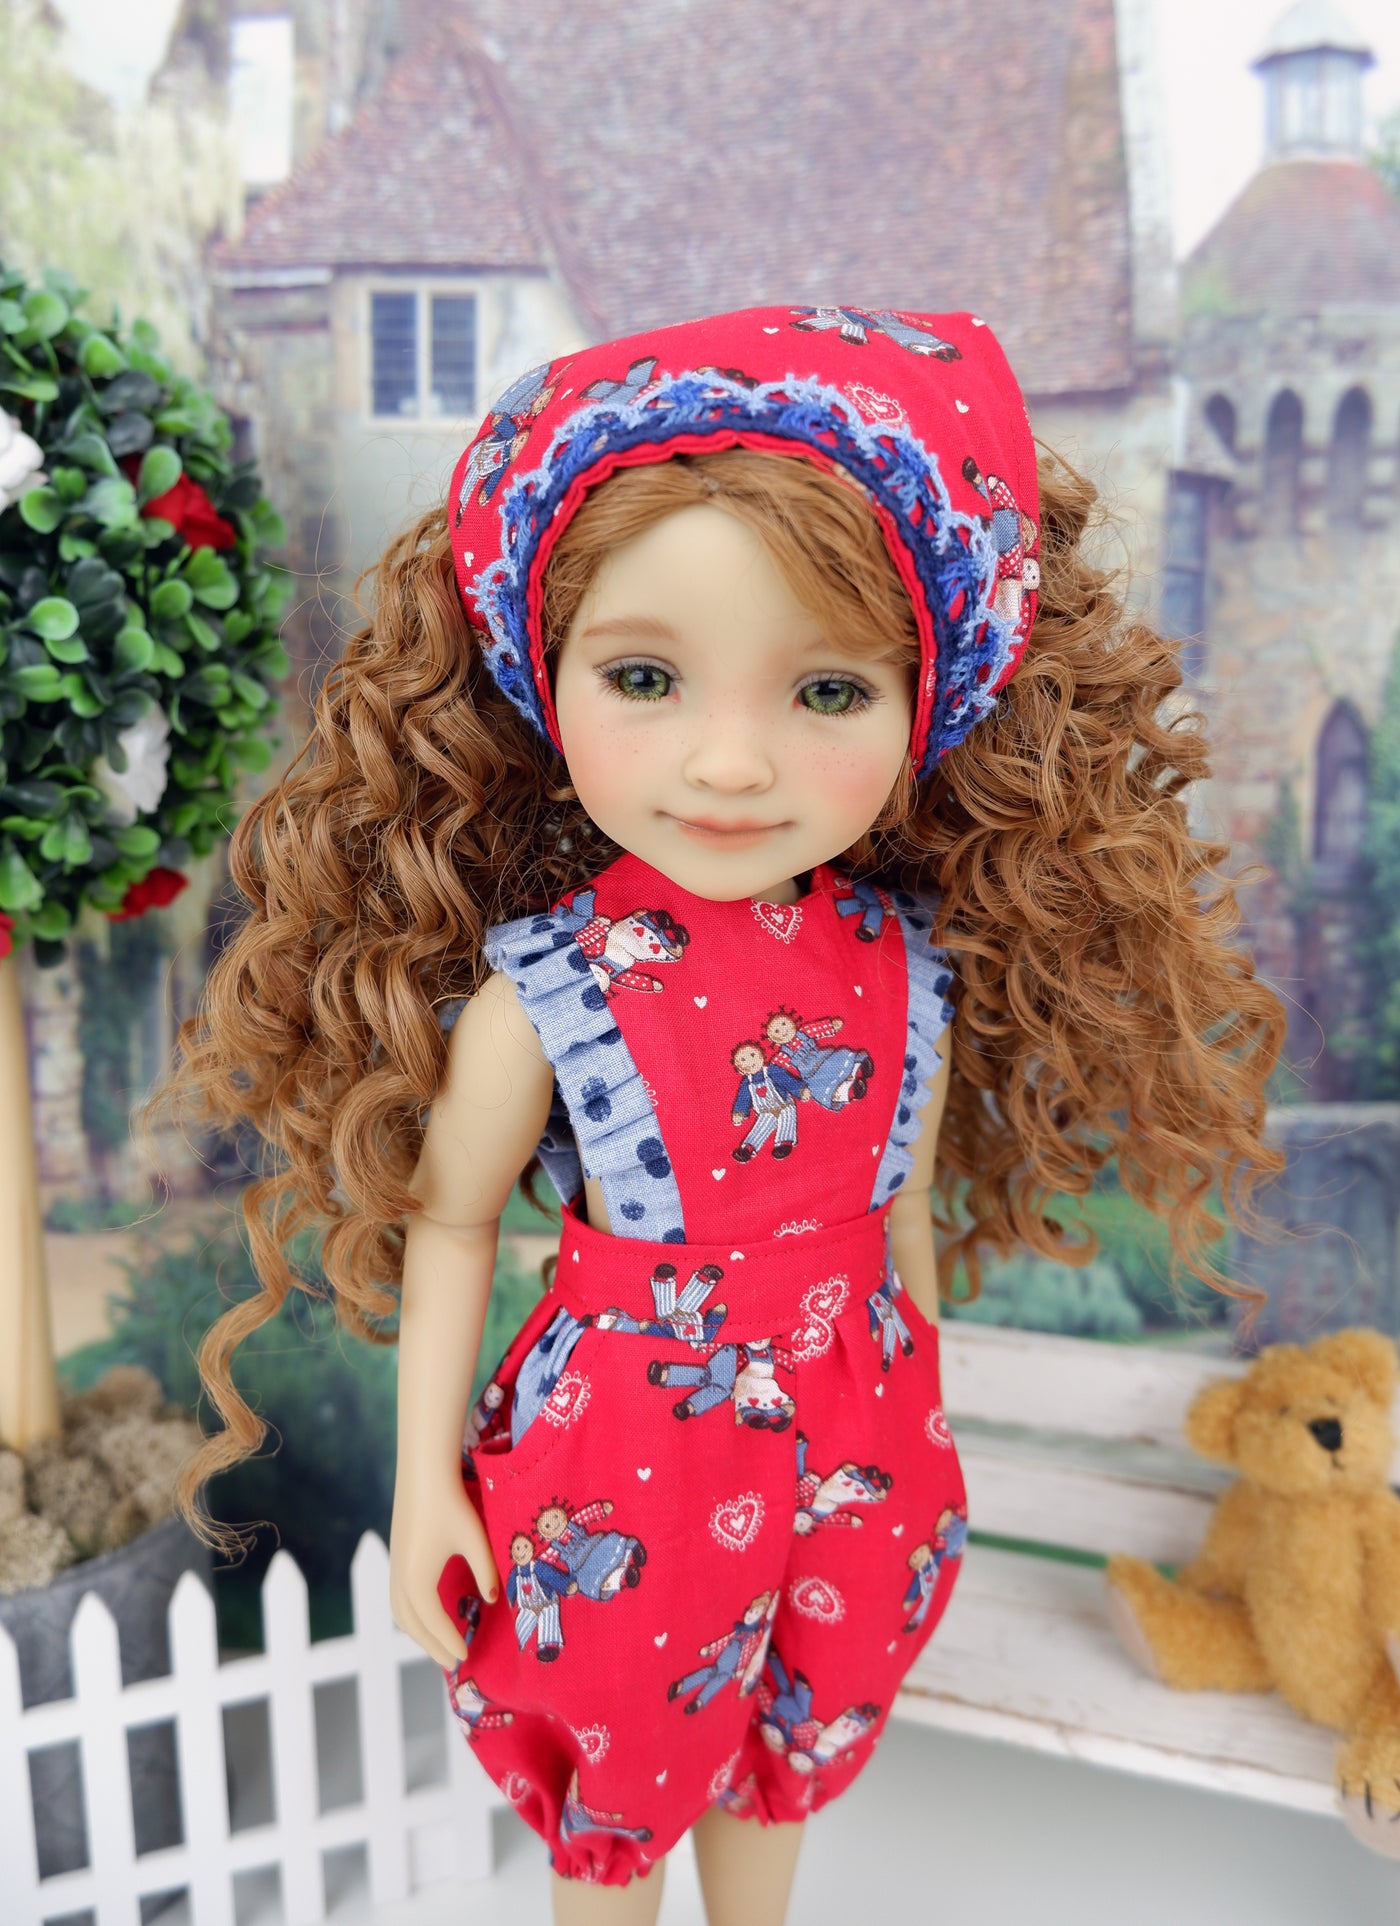 Raggedy Ann & Andy - romper with shoes for Ruby Red Fashion Friends doll